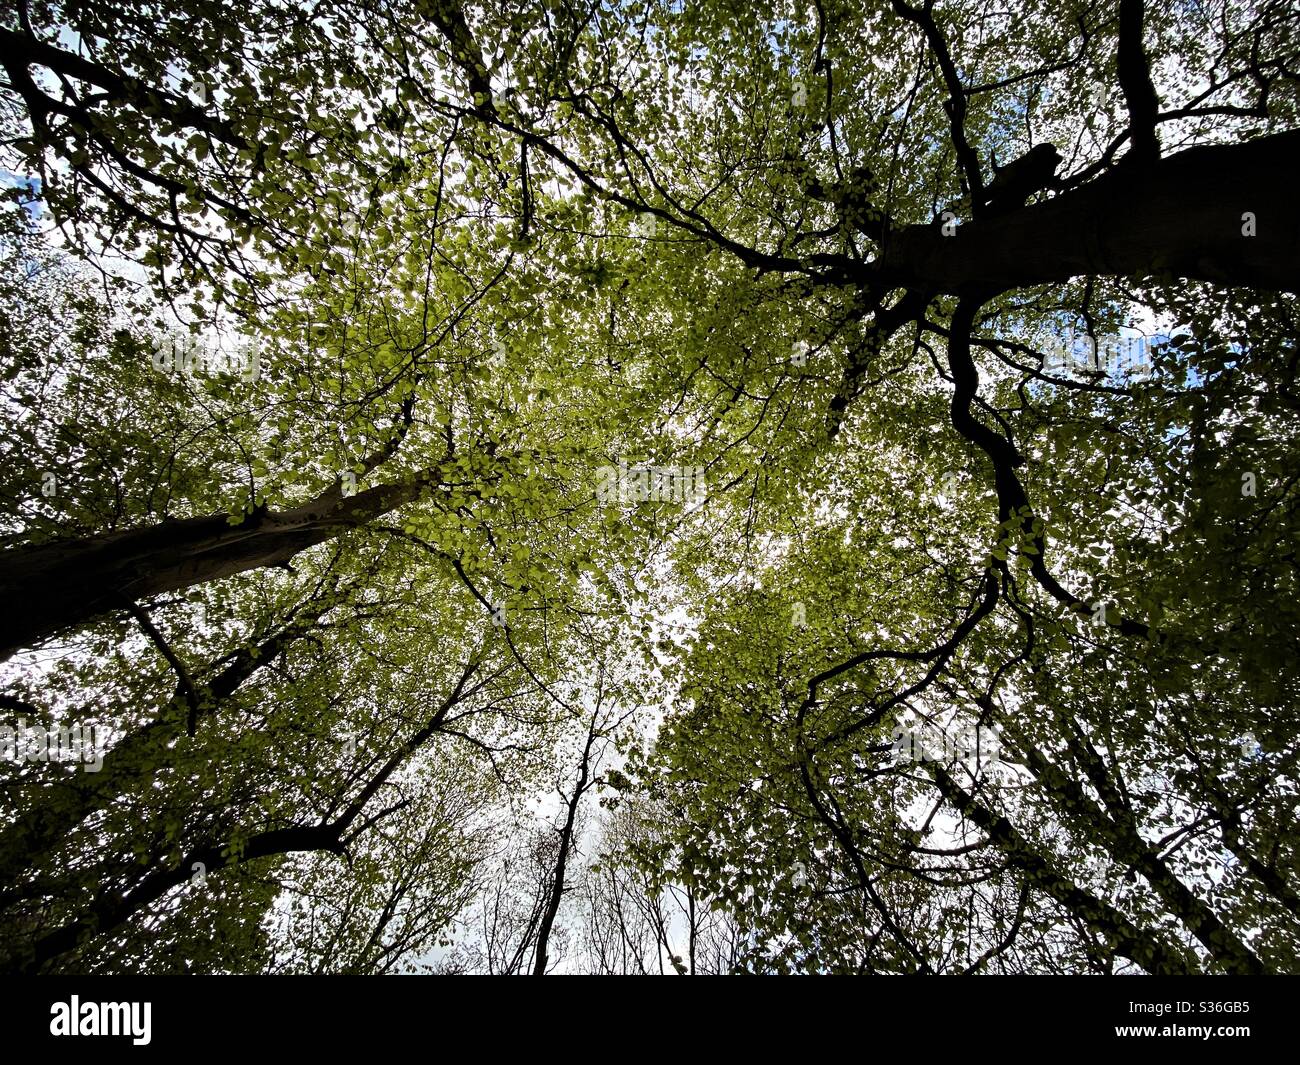 Worm’s eye perspective in a rural British forest. With ominous and abstract tree trunks creating silhouettes with crooked branches and early spring foliage Stock Photo